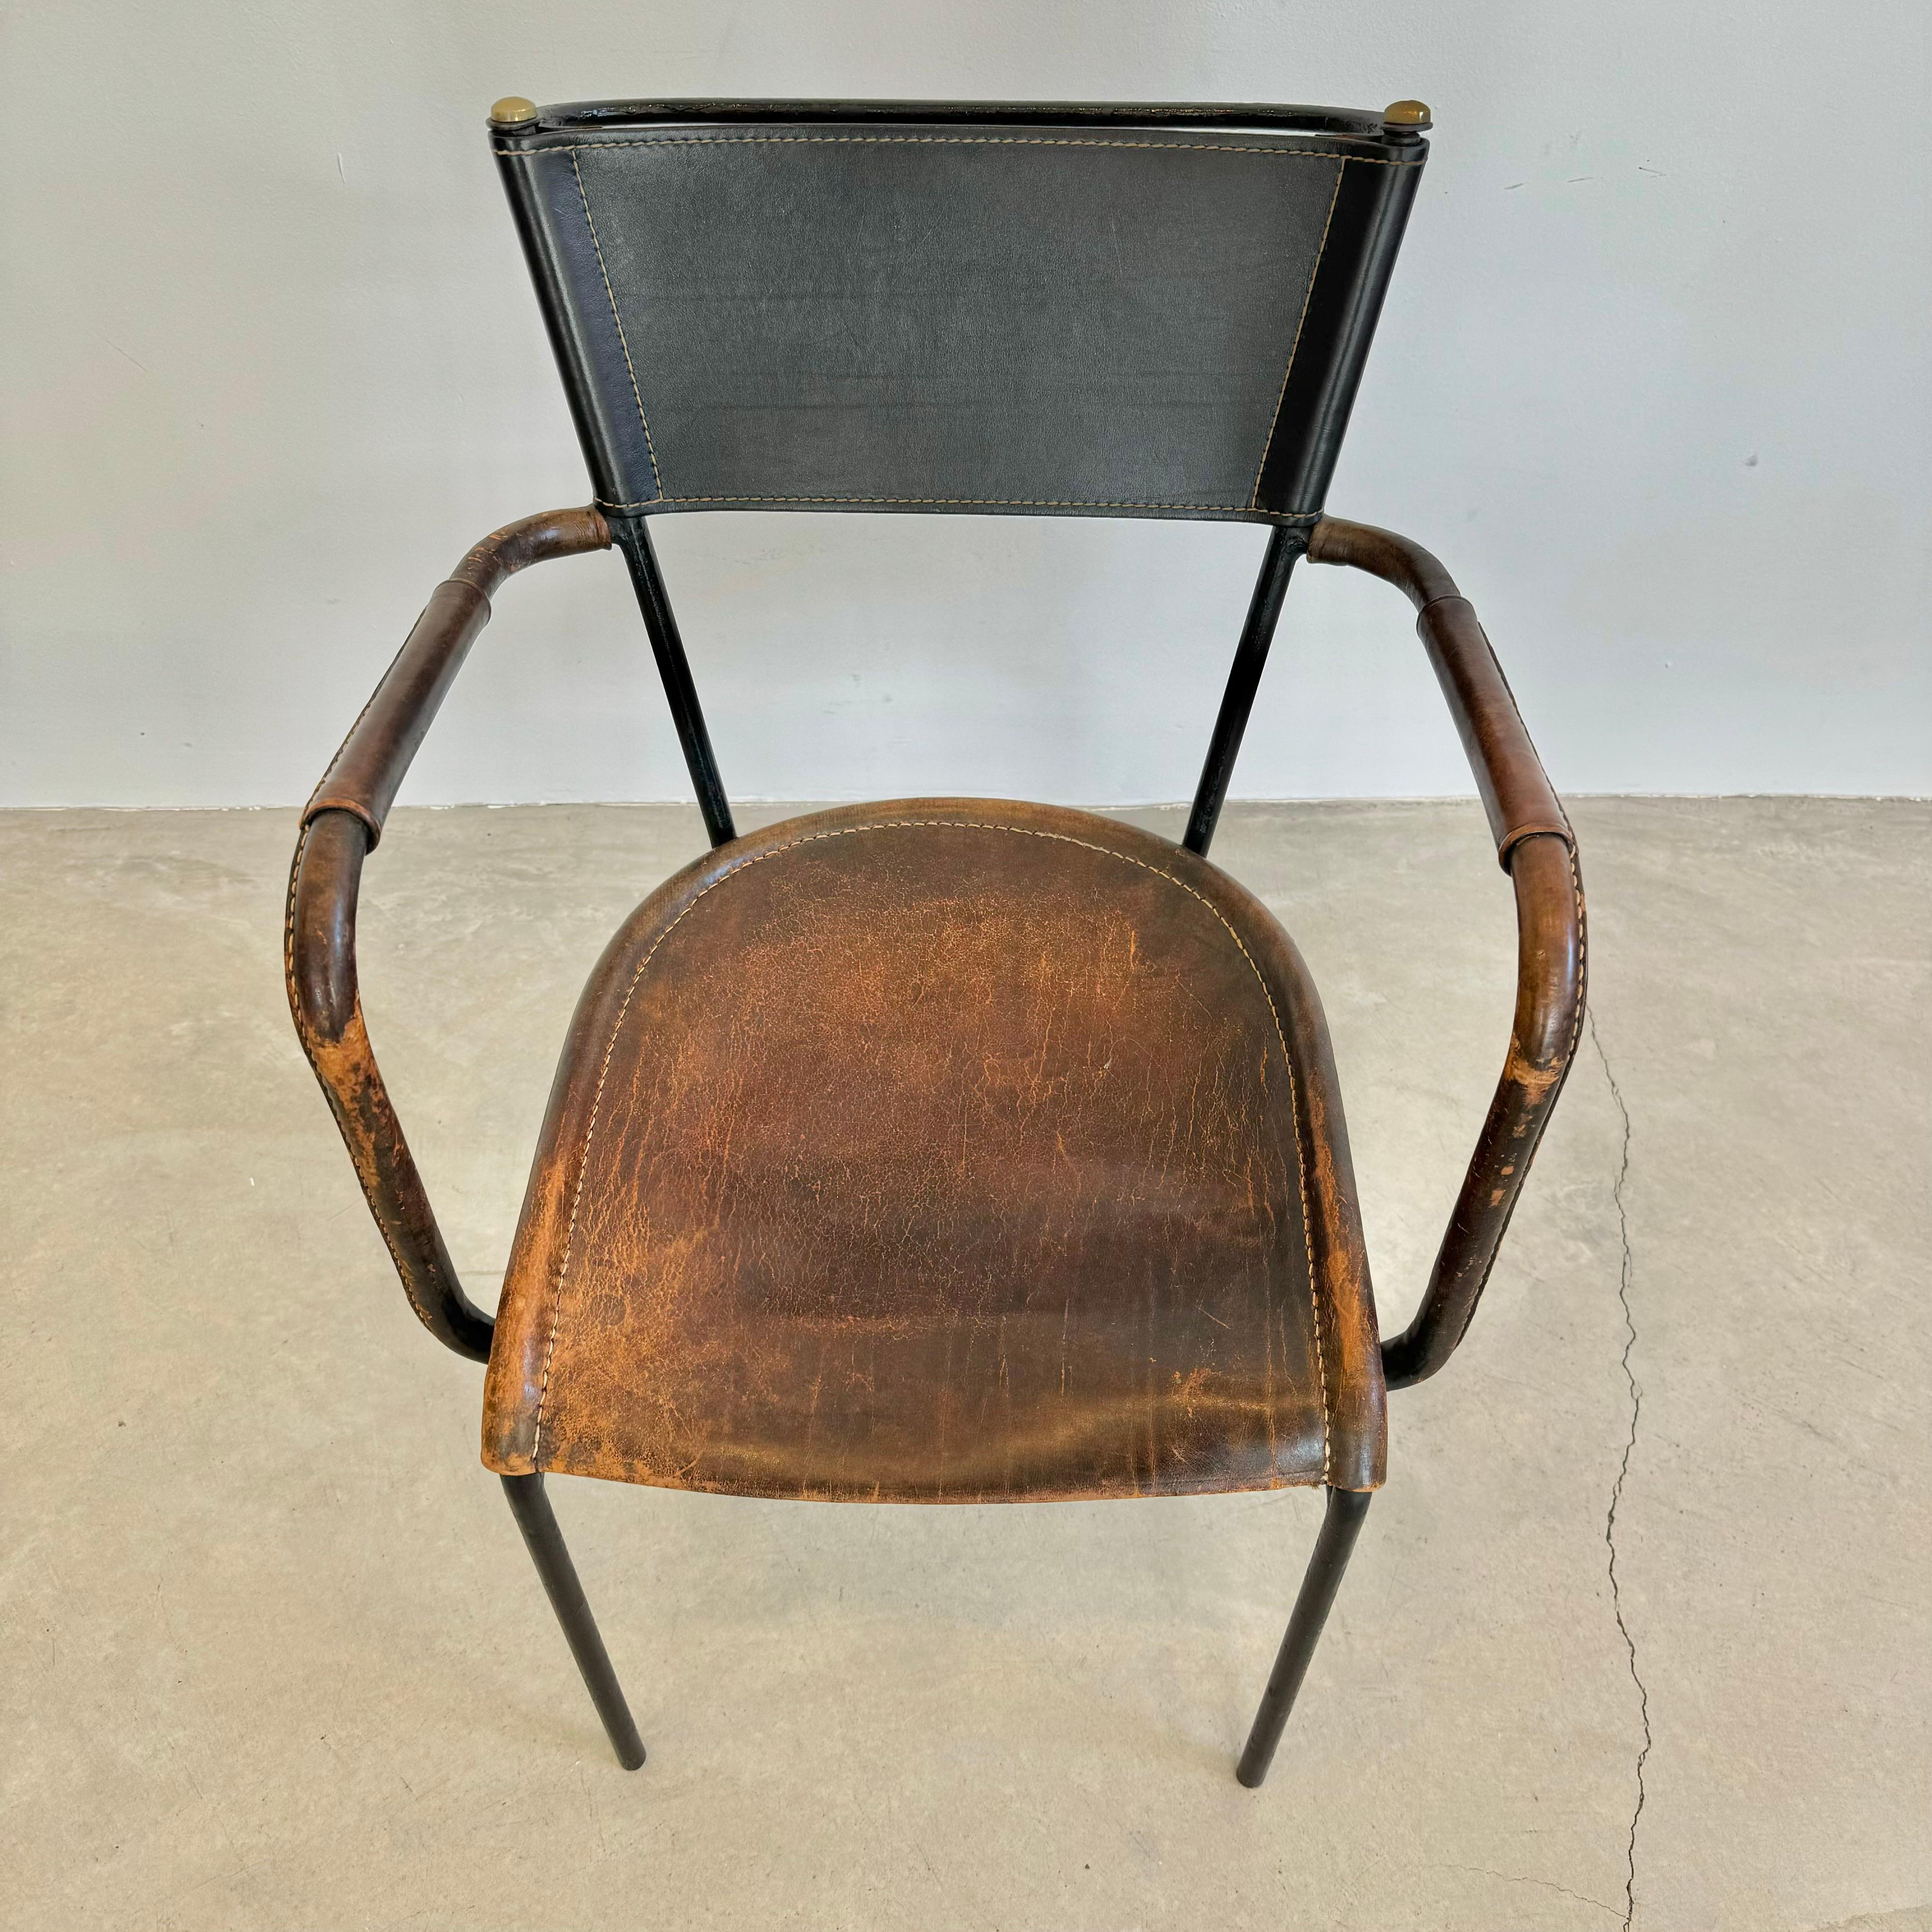 Stunning chair by French designer Jacques Adnet. Black metal tube frame with leather seat, leather seat back and leather wrapped armrests. Chair features a beautiful wing loop armrest design with an additional iron handle on the backrest secured to